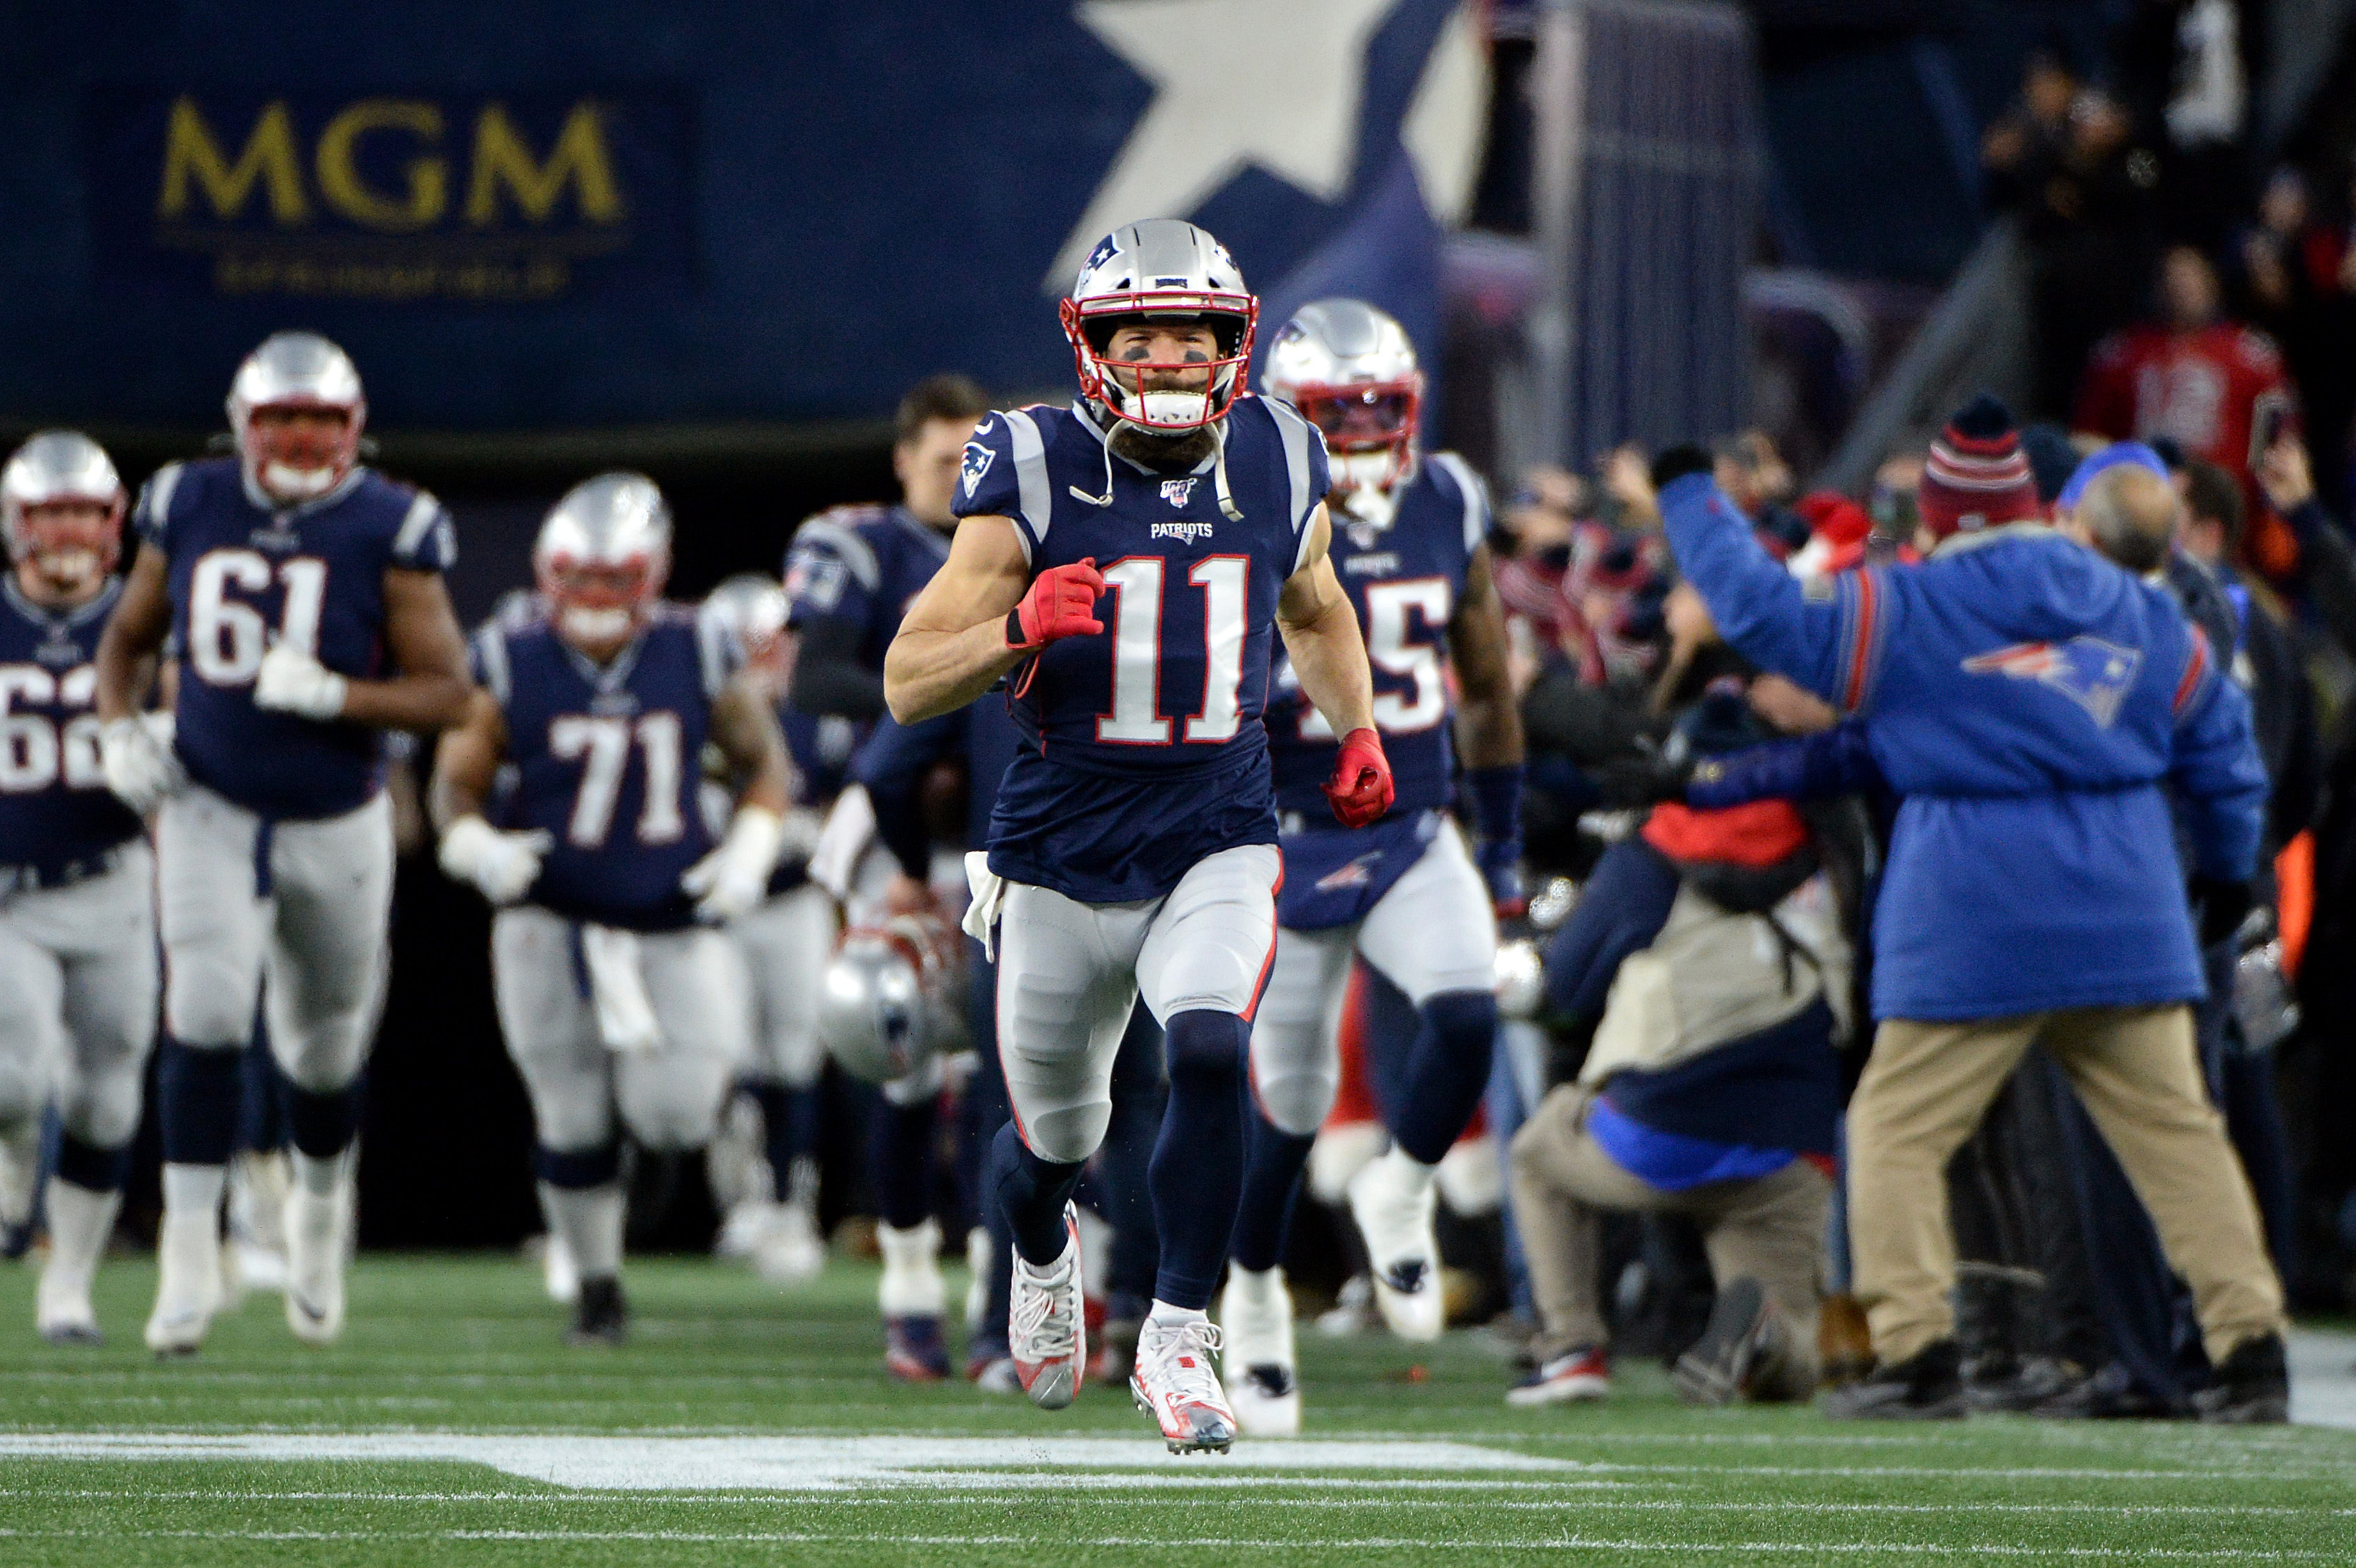 The bigger the chip on his shoulder, the better Julian Edelman plays. (Photo by Kathryn Riley/Getty Images)